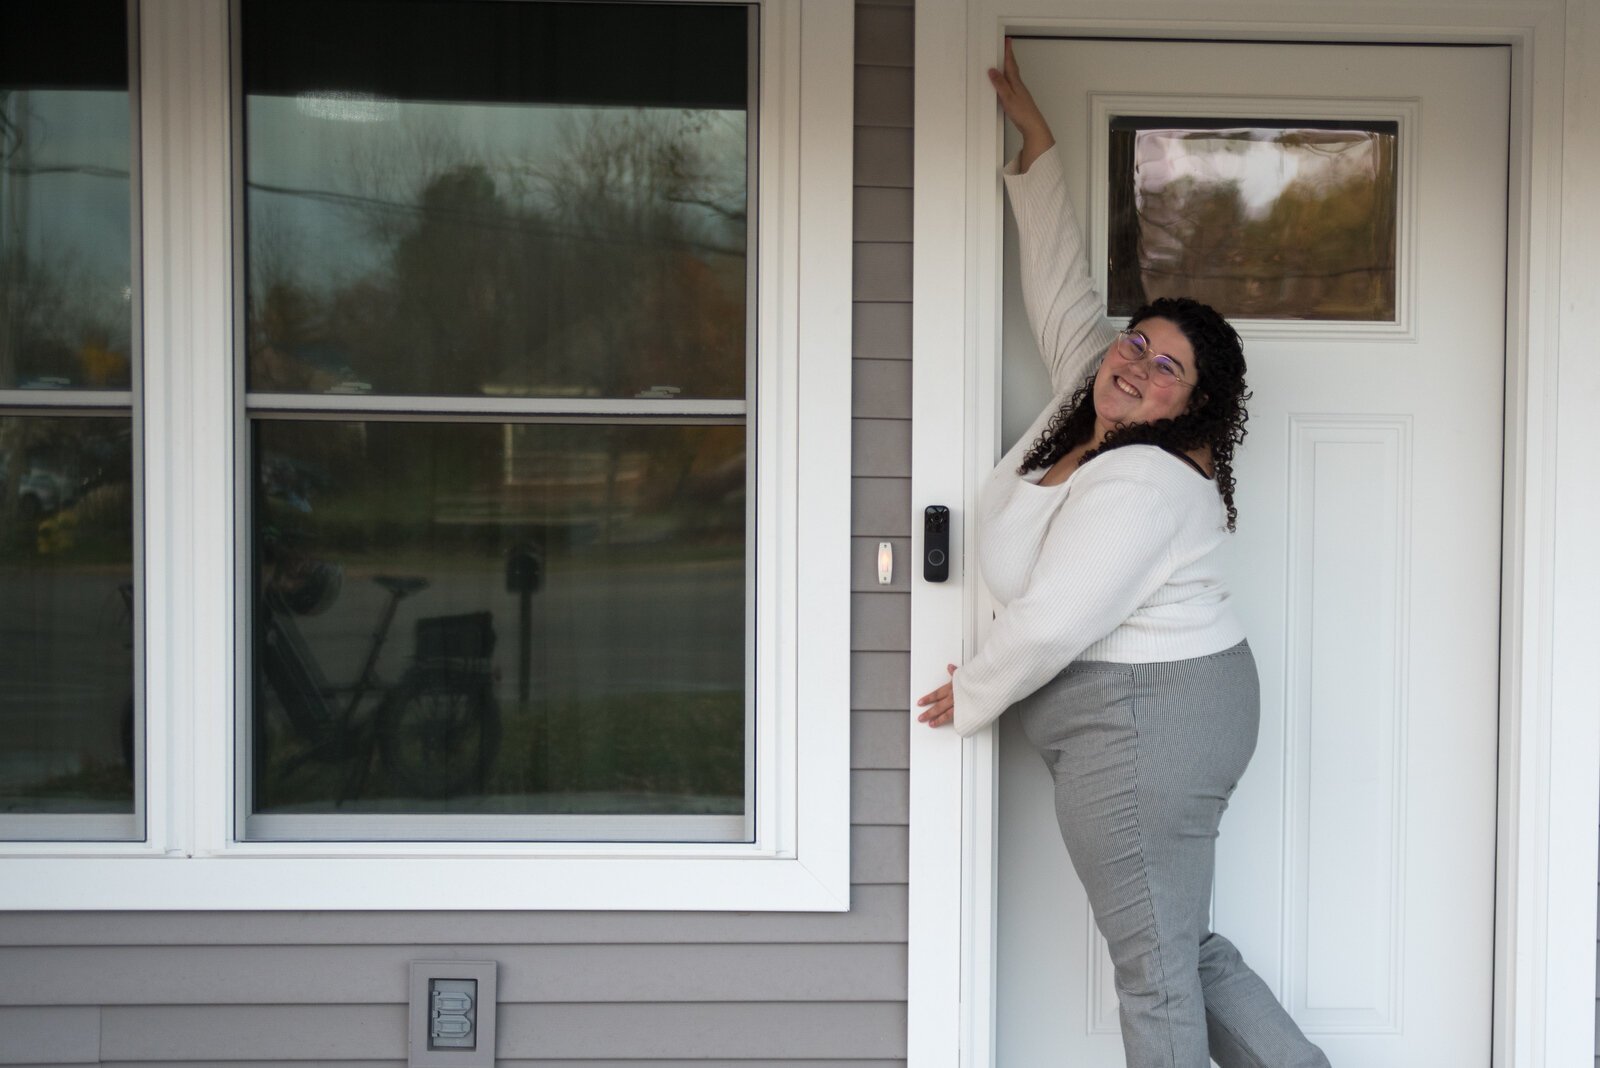 Blaise Boulding, 23, a recent grad of Lake Superior State University with a new job at Pfizer, is starting her post-college life off with confidence thanks to owning her own home.